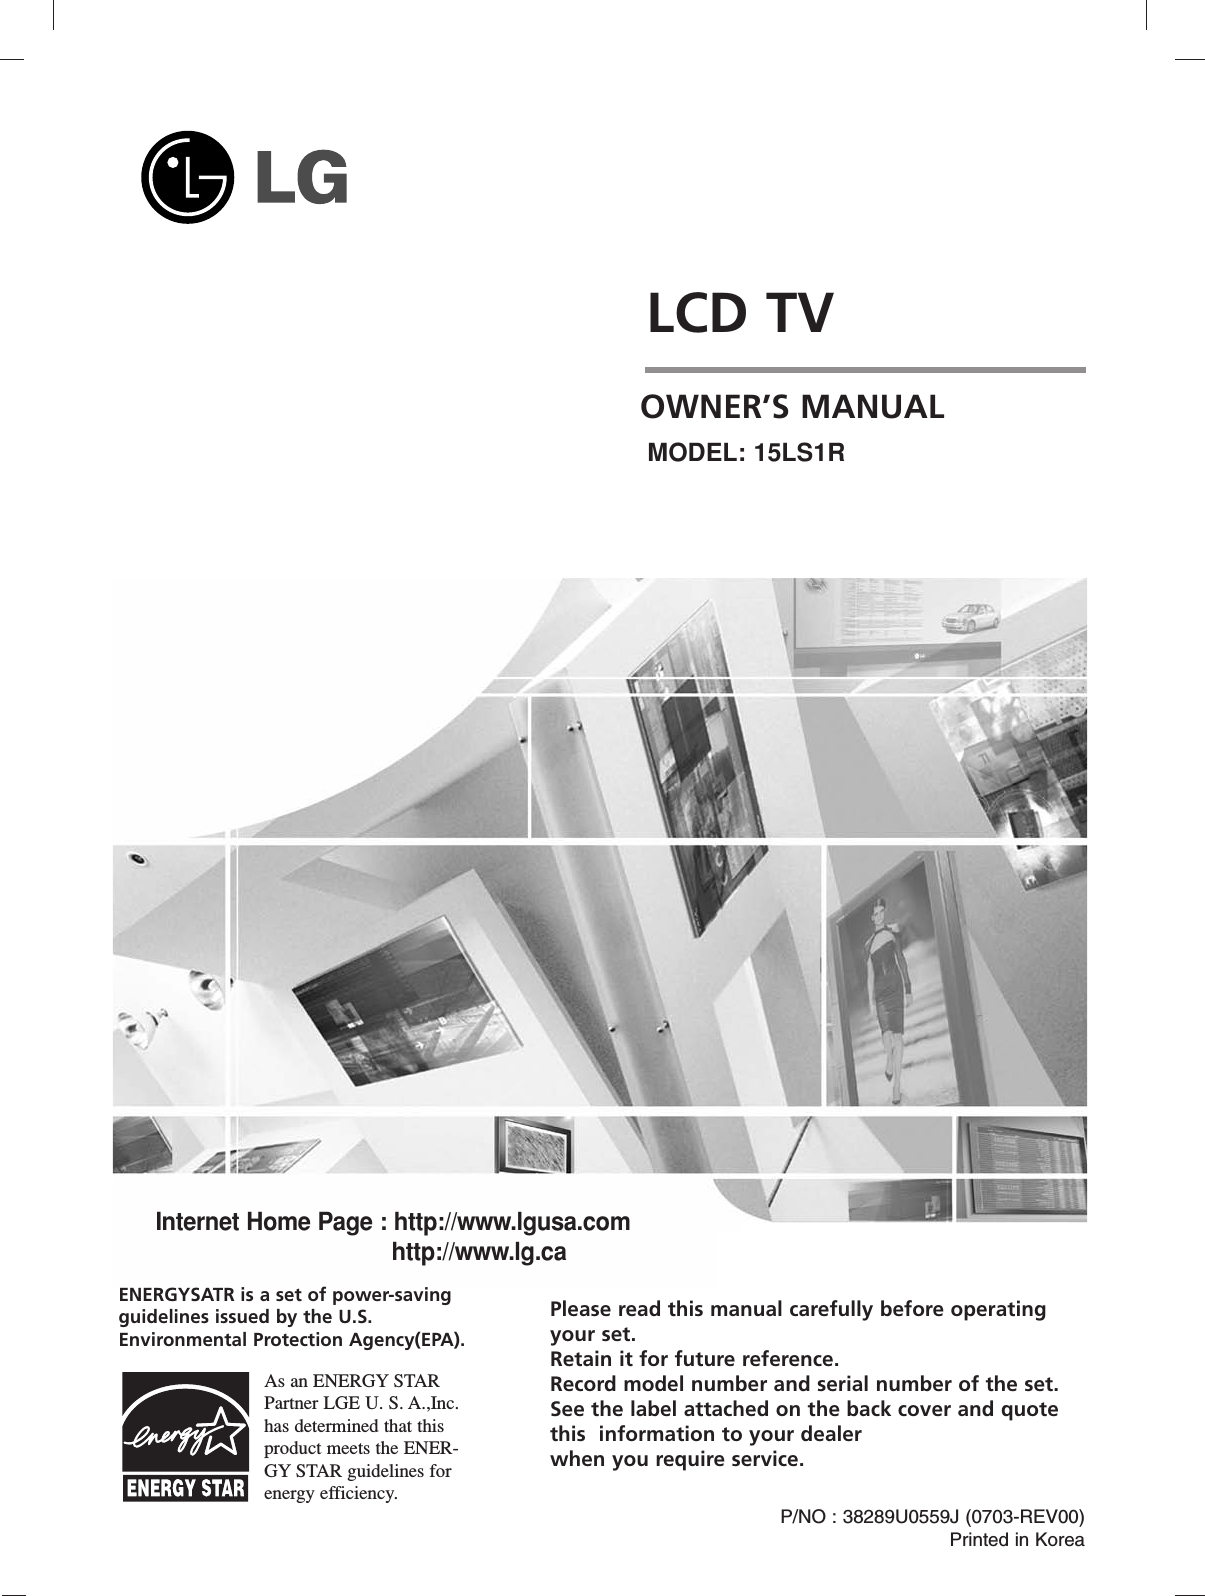 LCD TVPlease read this manual carefully before operatingyour set. Retain it for future reference.Record model number and serial number of the set. See the label attached on the back cover and quote this  information to your dealer when you require service.P/NO : 38289U0559J (0703-REV00)Printed in KoreaOWNER’S MANUALMODEL: 15LS1RInternet Home Page : http://www.lgusa.comhttp://www.lg.caENERGYSATR is a set of power-savingguidelines issued by the U.S.Environmental Protection Agency(EPA).As an ENERGY STARPartner LGE U. S. A.,Inc.has determined that thisproduct meets the ENER-GY STAR guidelines forenergy efficiency.